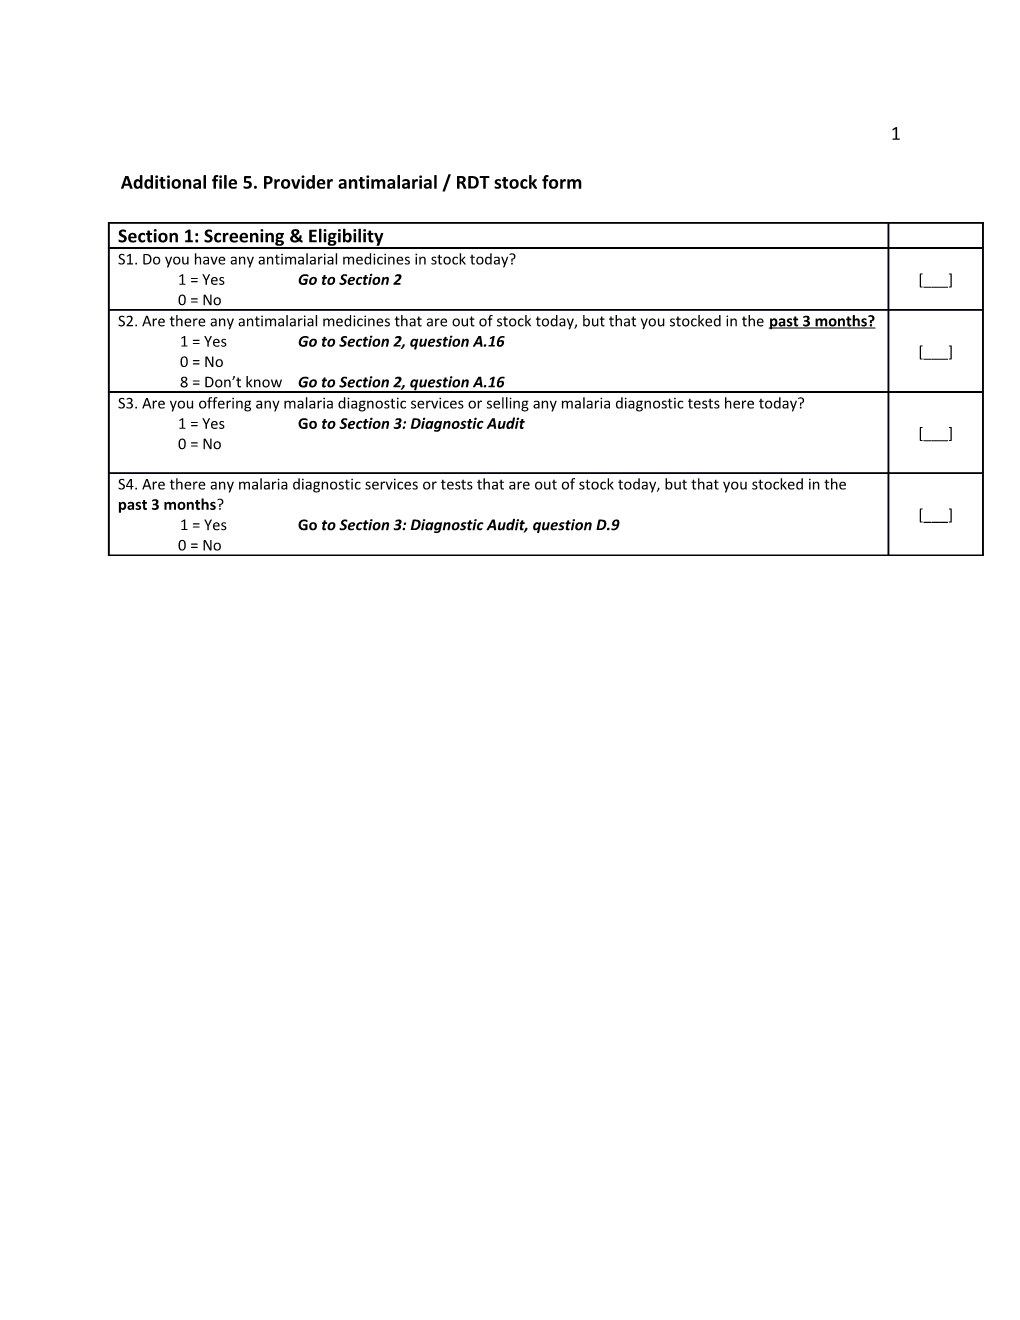 Additional File 5 . Provider Antimalarial / RDT Stock Form